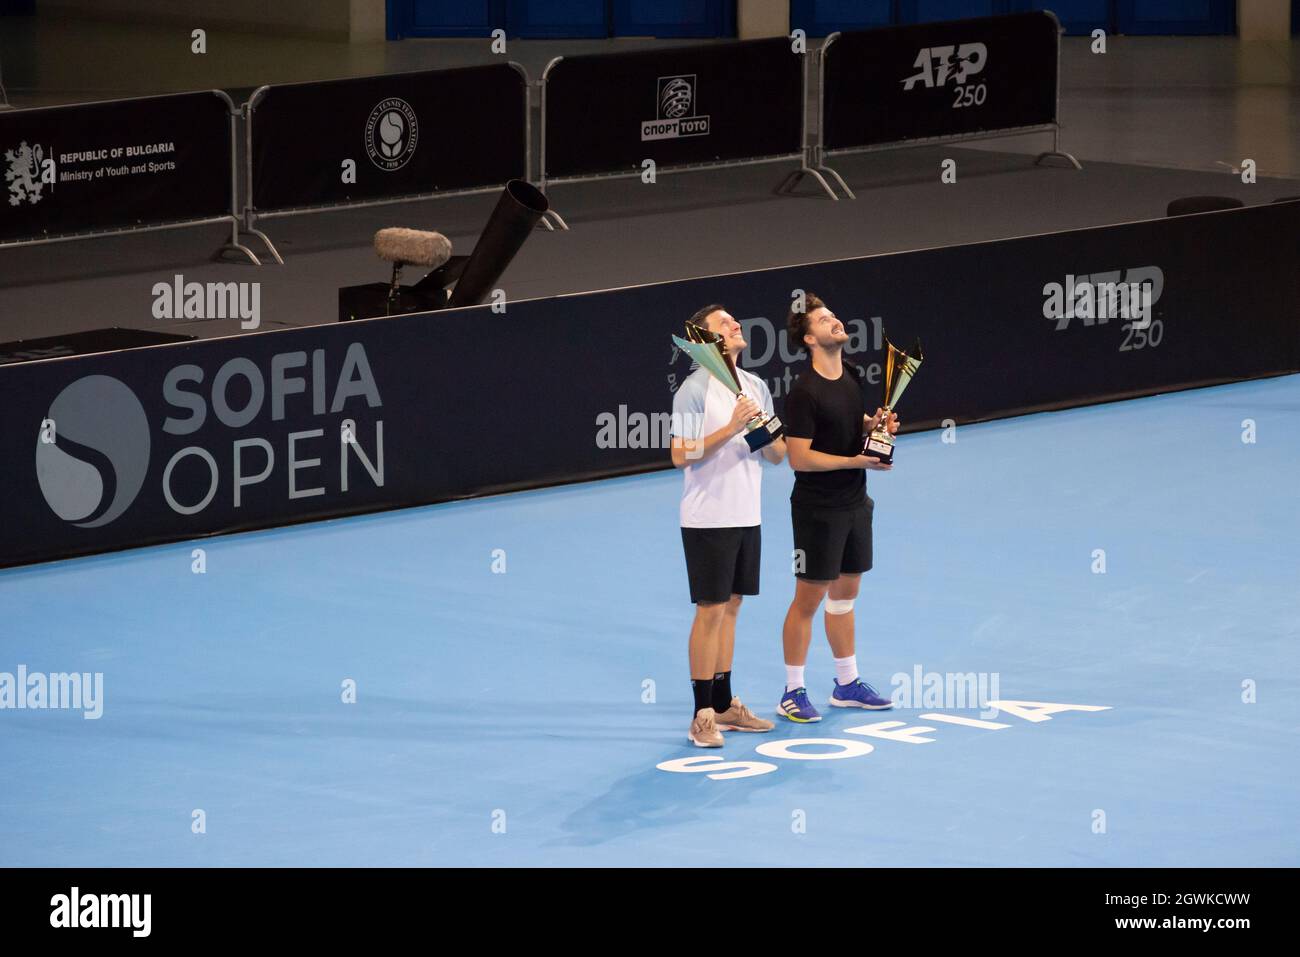 Sofia, Bulgaria. 03 October 2021. Jonny O'Mara and Ken Skupski of Great Britain celebrates after winning 6:3 6:4 the title against Oliver Marach and Philipp Oswald of Austria at the final of the Sofia Open 2021 ATP 250 indoor tennis tournament on hard courts. Stock Photo